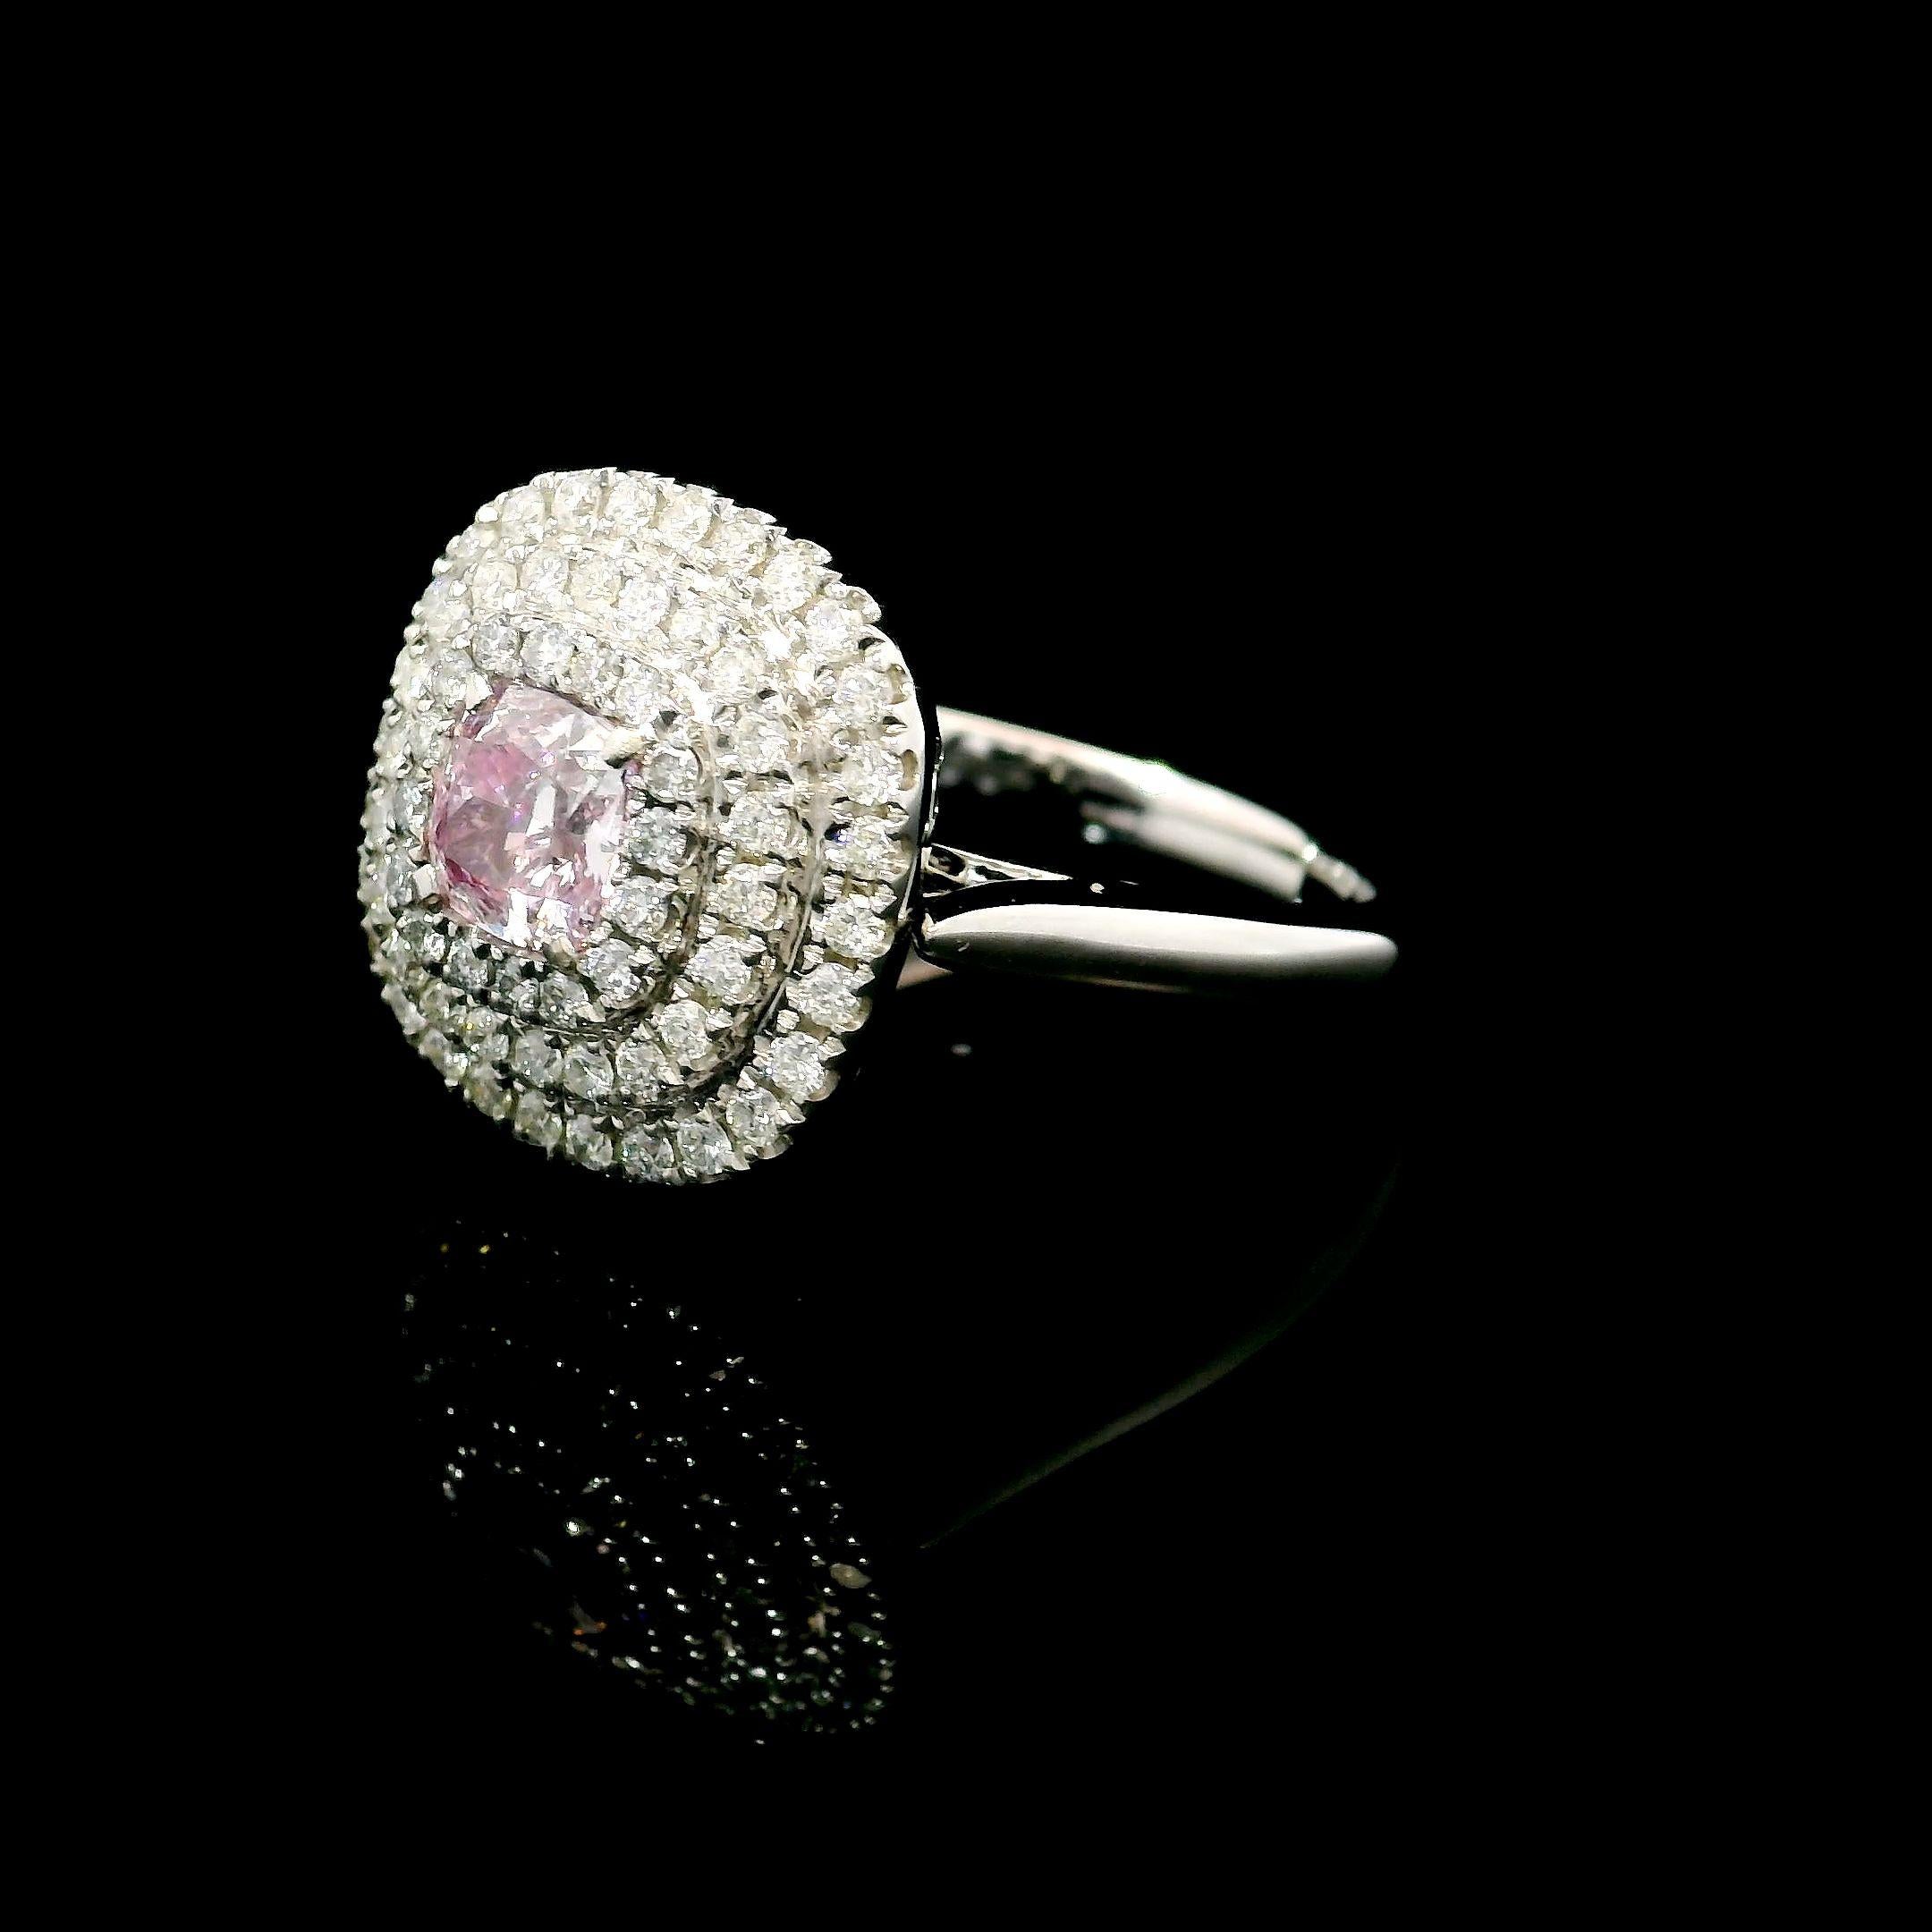 0.60 Carat Faint Pink VVS2 Clarity GIA Certified For Sale 1